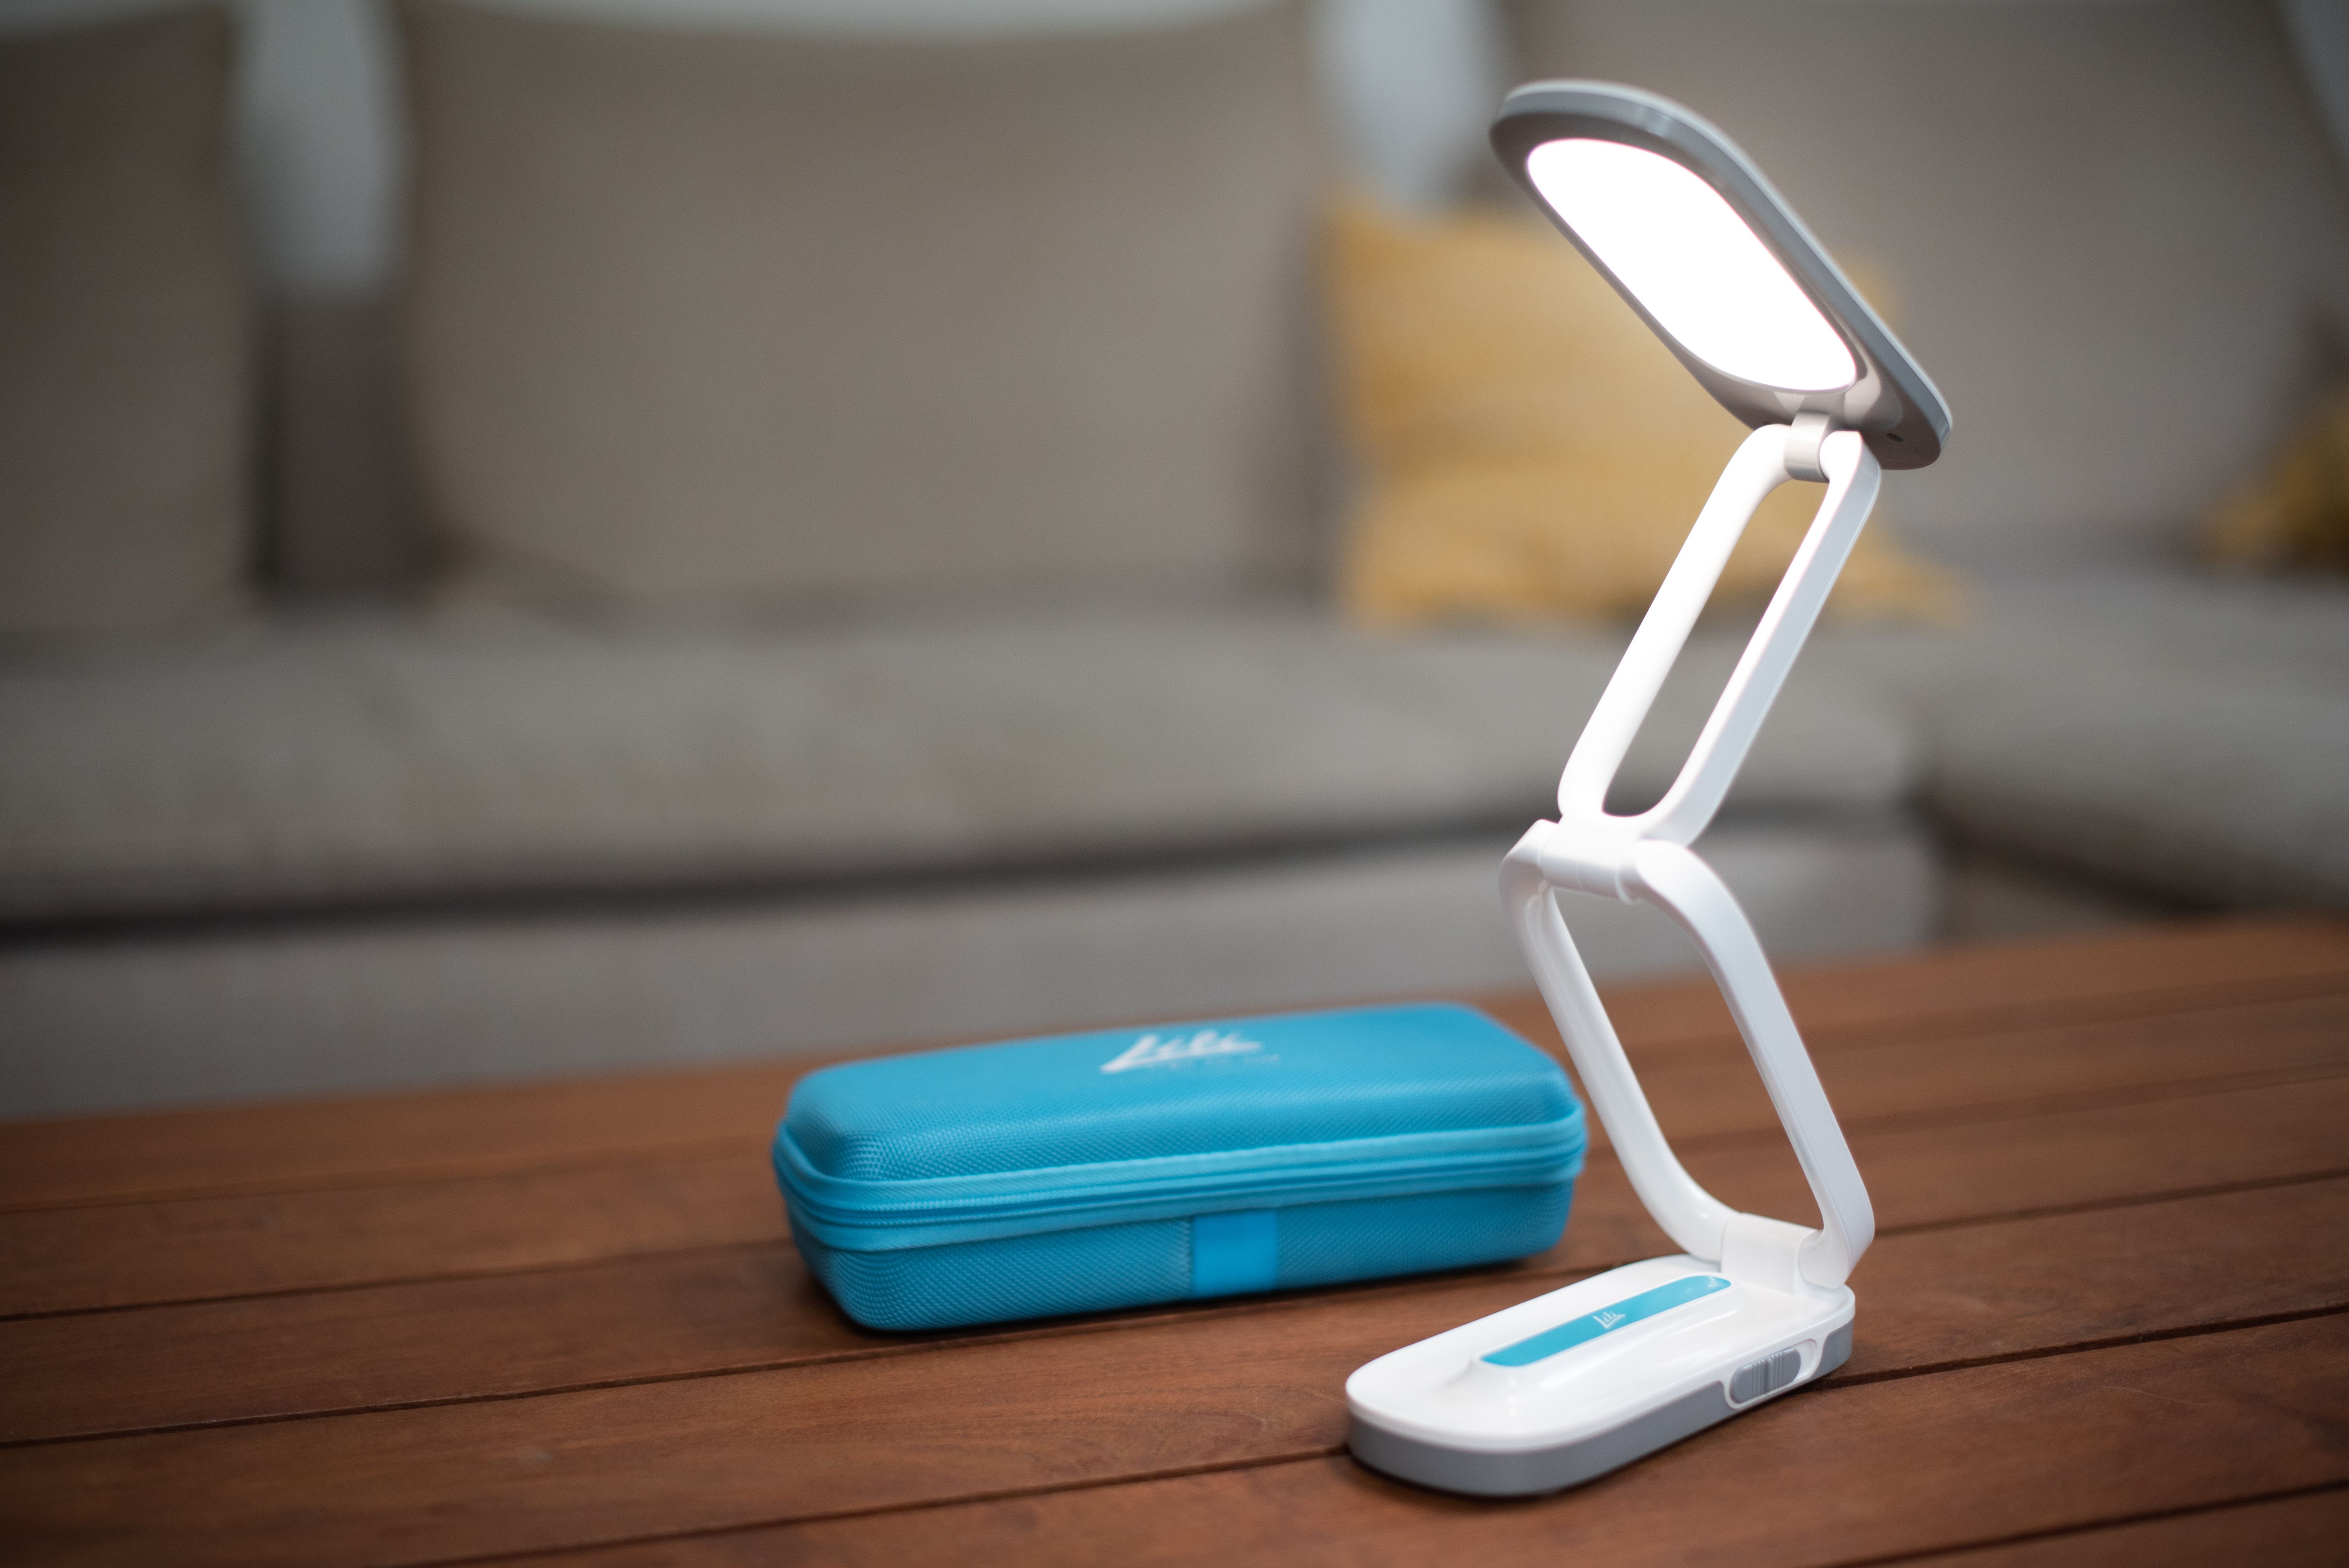 CES 2022: Lili Lamp Helps People With Dyslexia Read Better